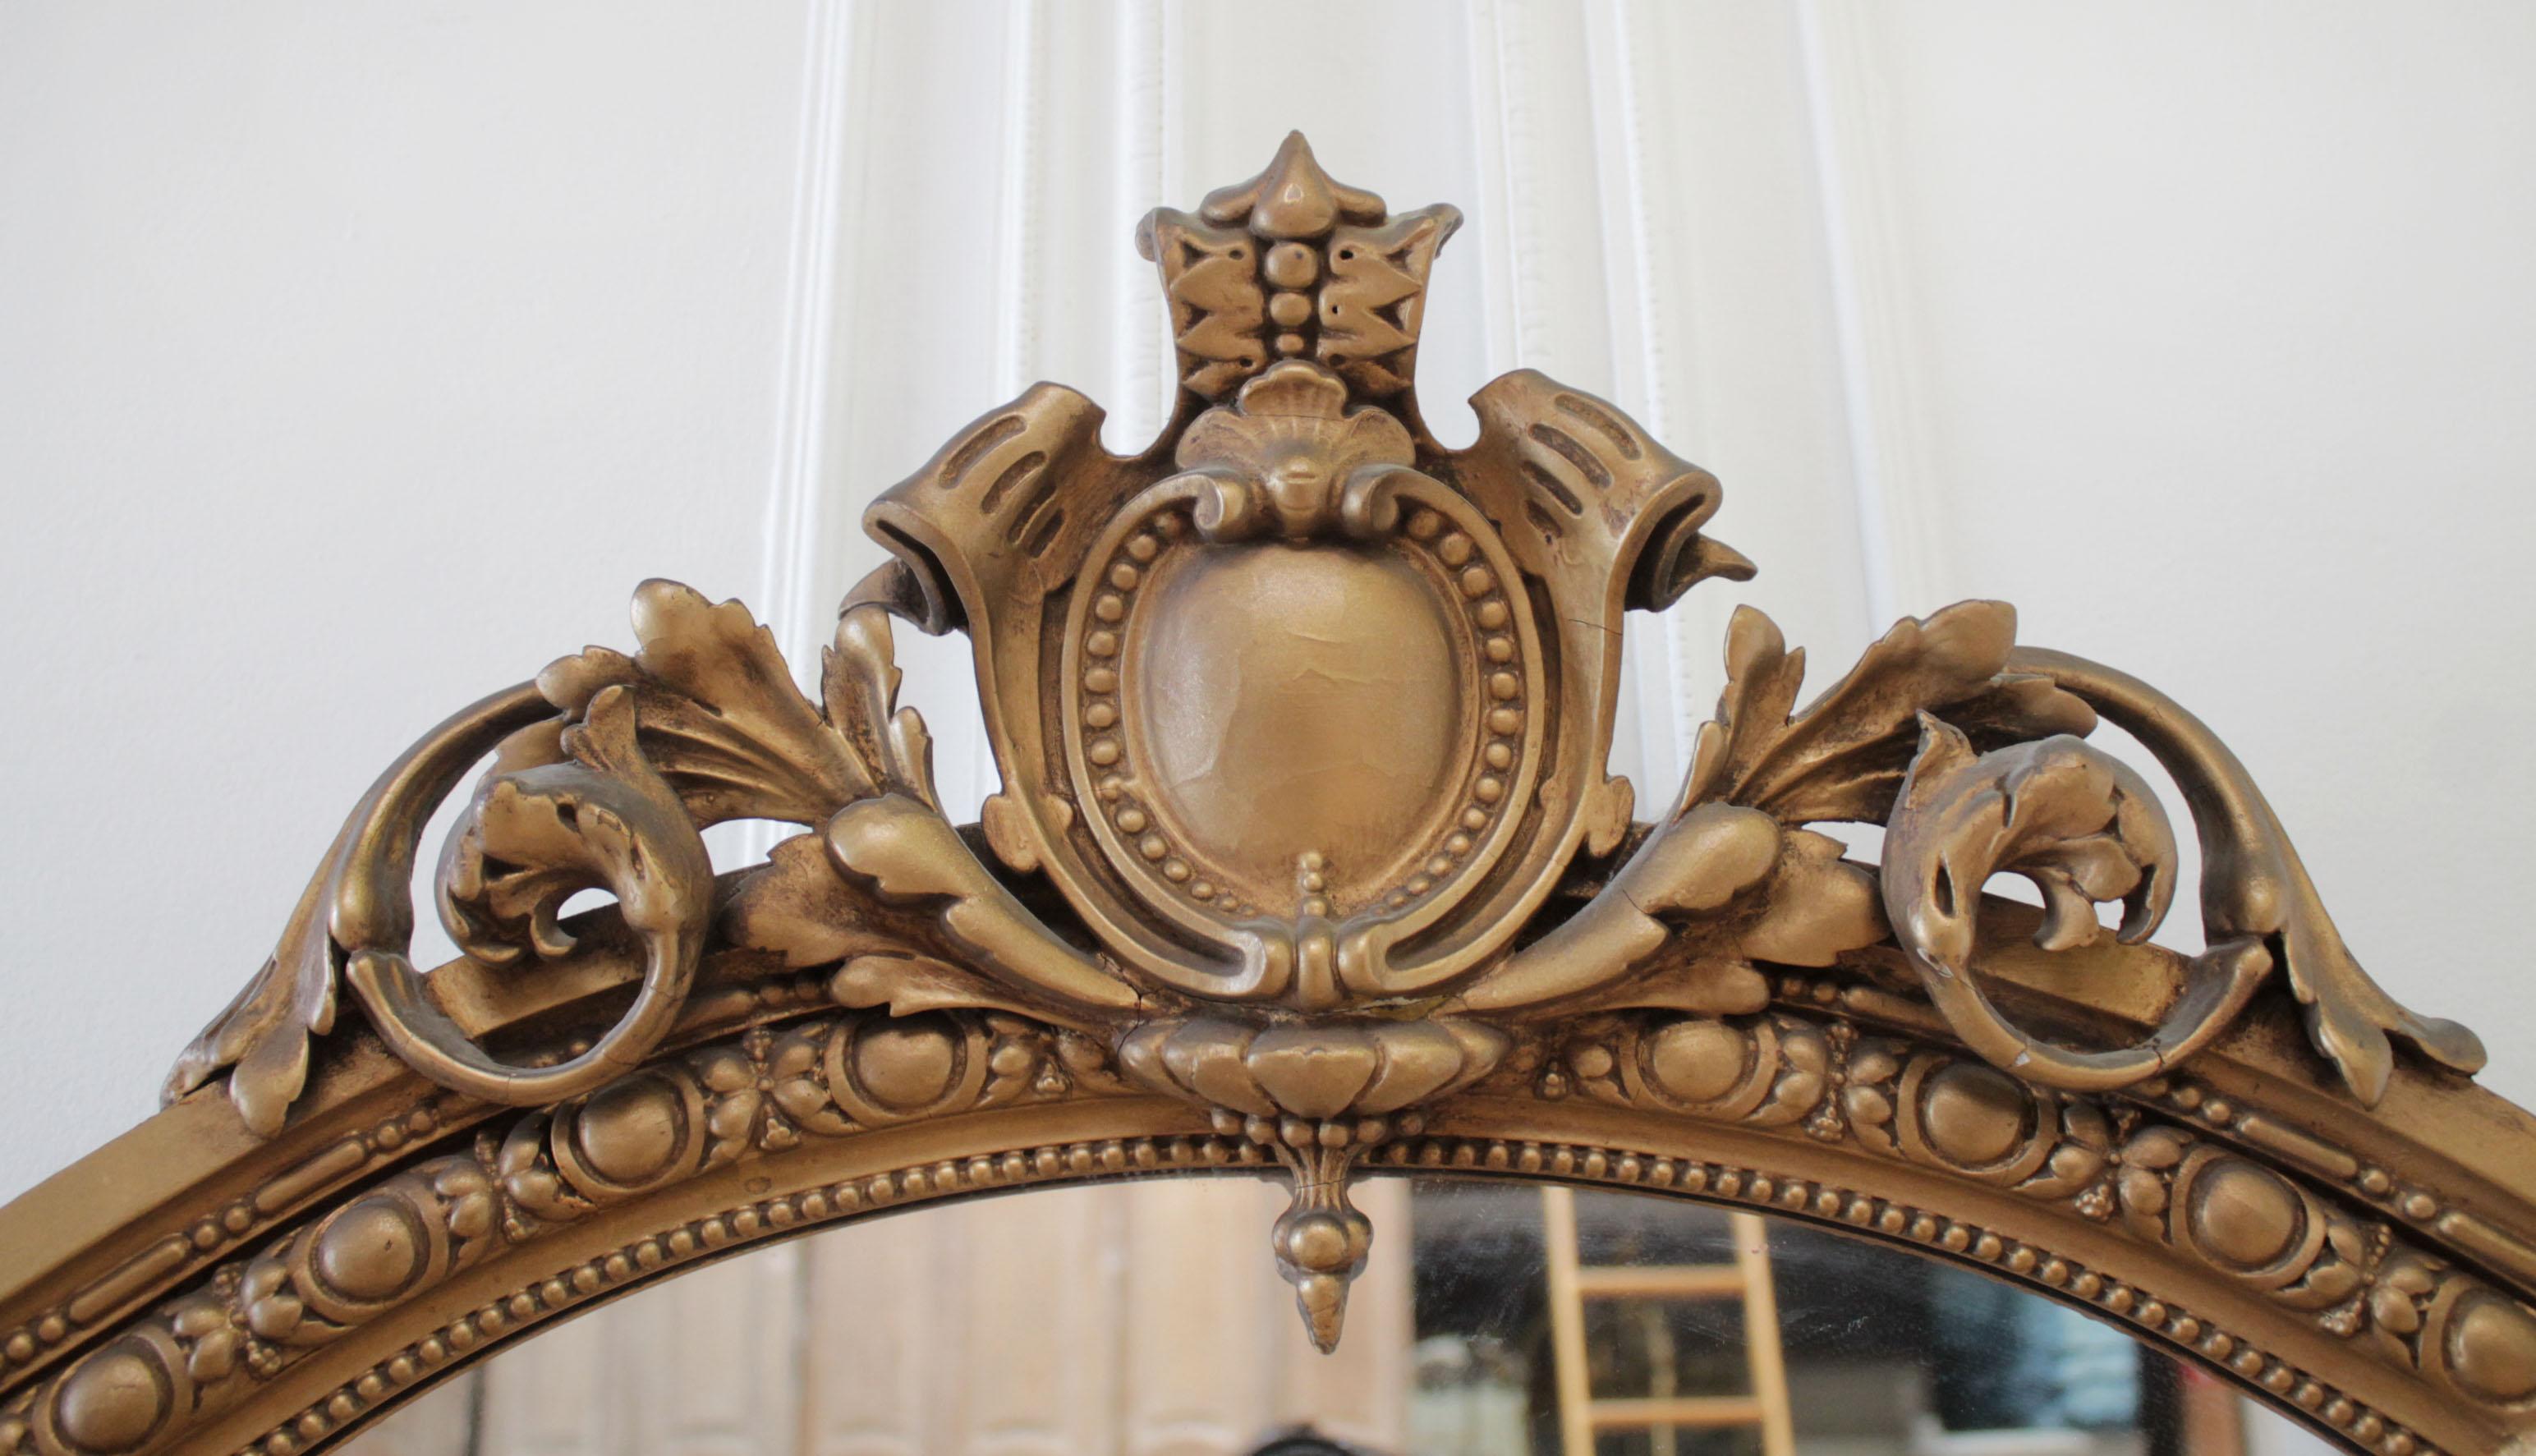 Vintage neoclassical style giltwood mirror
All carvings are present, no major breaks or repairs. Finish might have small scuffs or scratches. Original finish, original mirror.
Size: 29.5